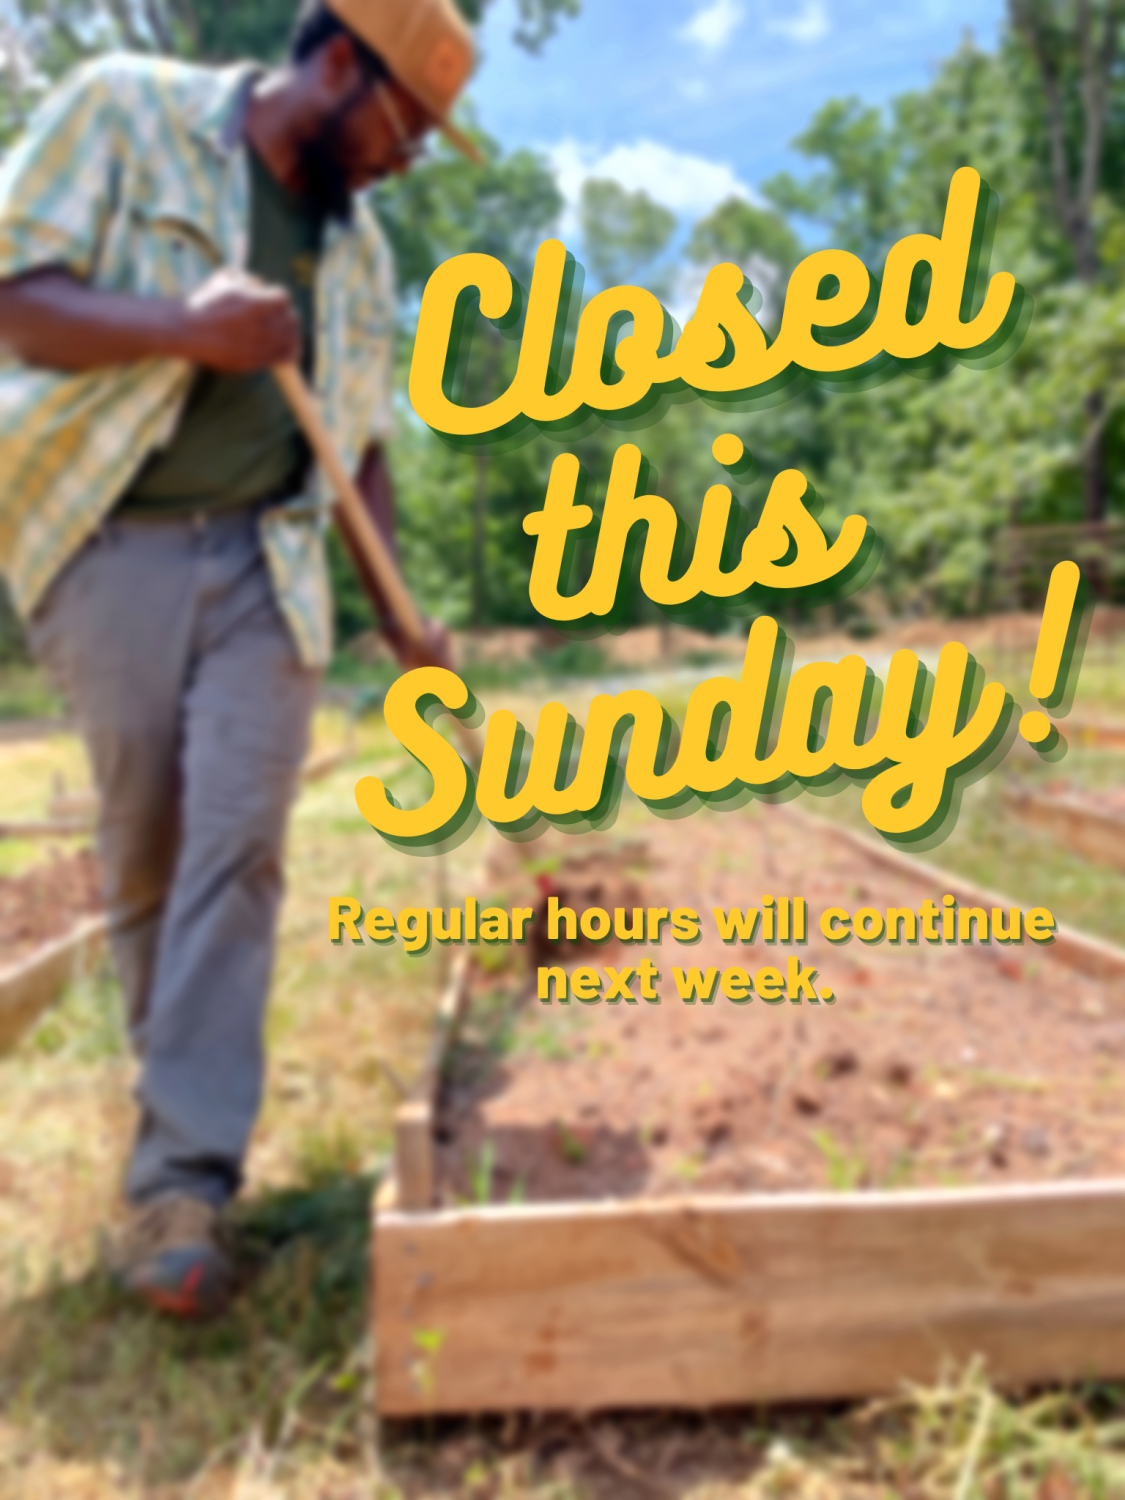 Previous Happening: Closed this Sunday June 5th!